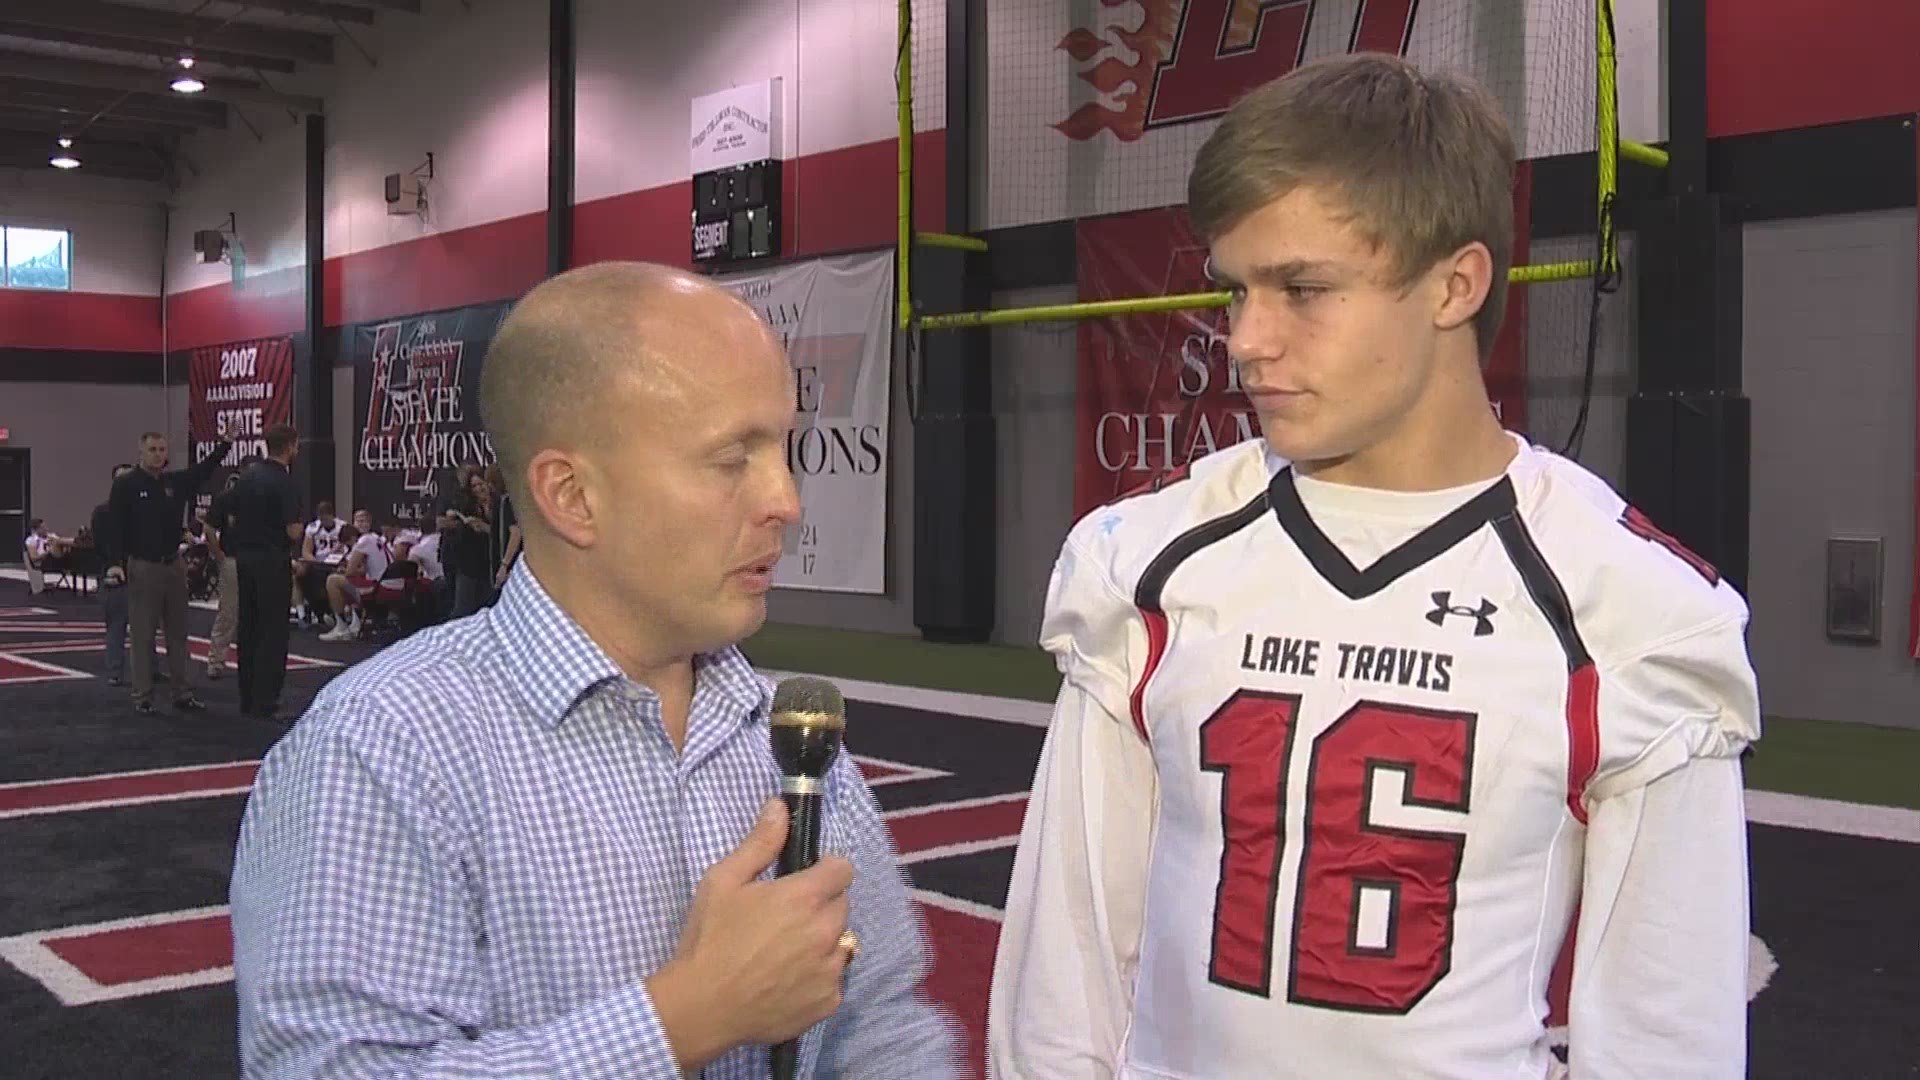 Lake Travis QB Charlie Brewer preps for the title game